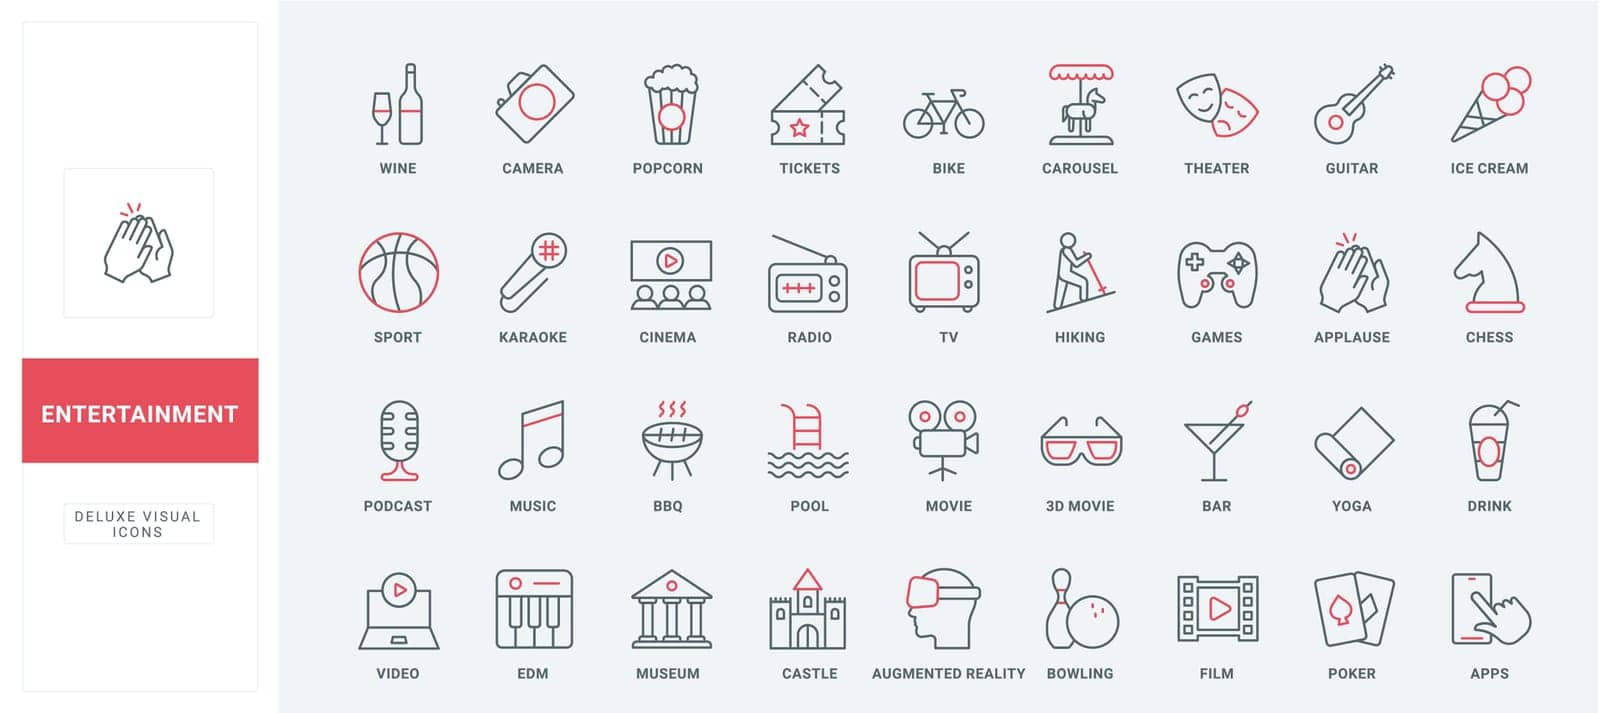 Entertainment and leisure thin black and red line icons set vector illustration. Outline cinema and theater symbols, museum and TV, masks of theater and popcorn for movie, carousel of amusement park